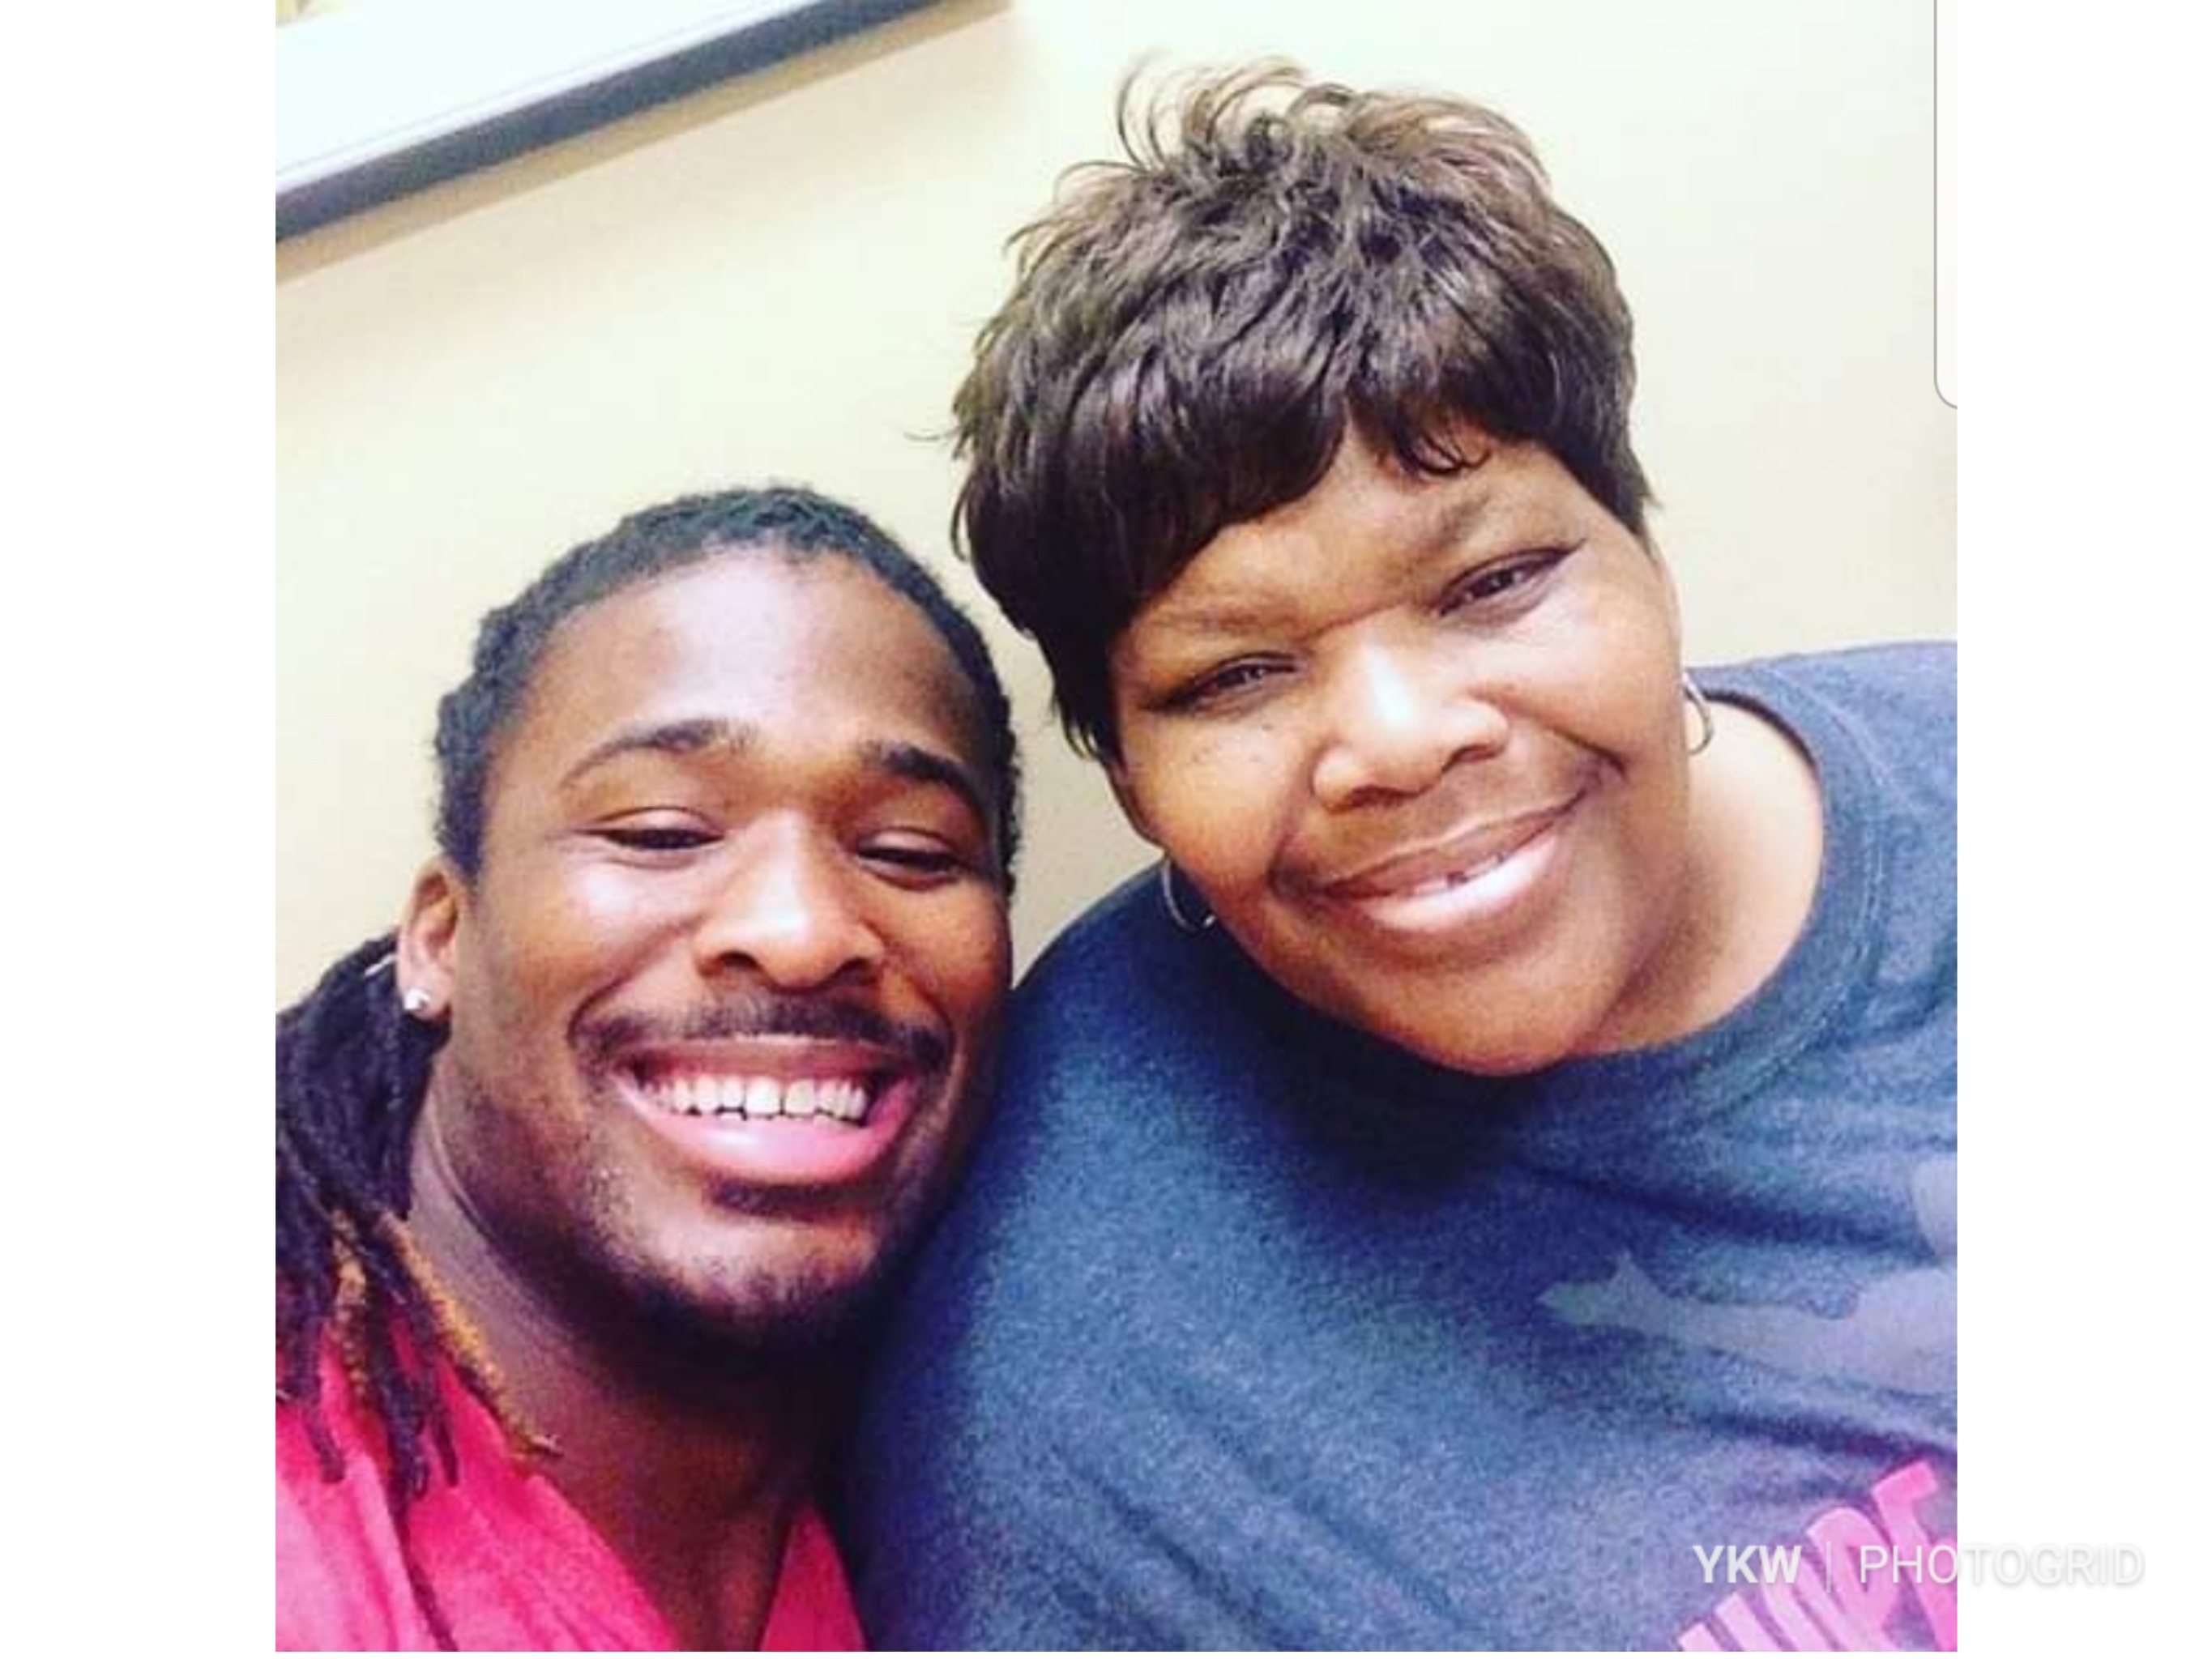 Former NFL Star DeAngelo Williams Sponsored Over 500 Mammograms To Honor Mom Who Died Of Breast Cancer